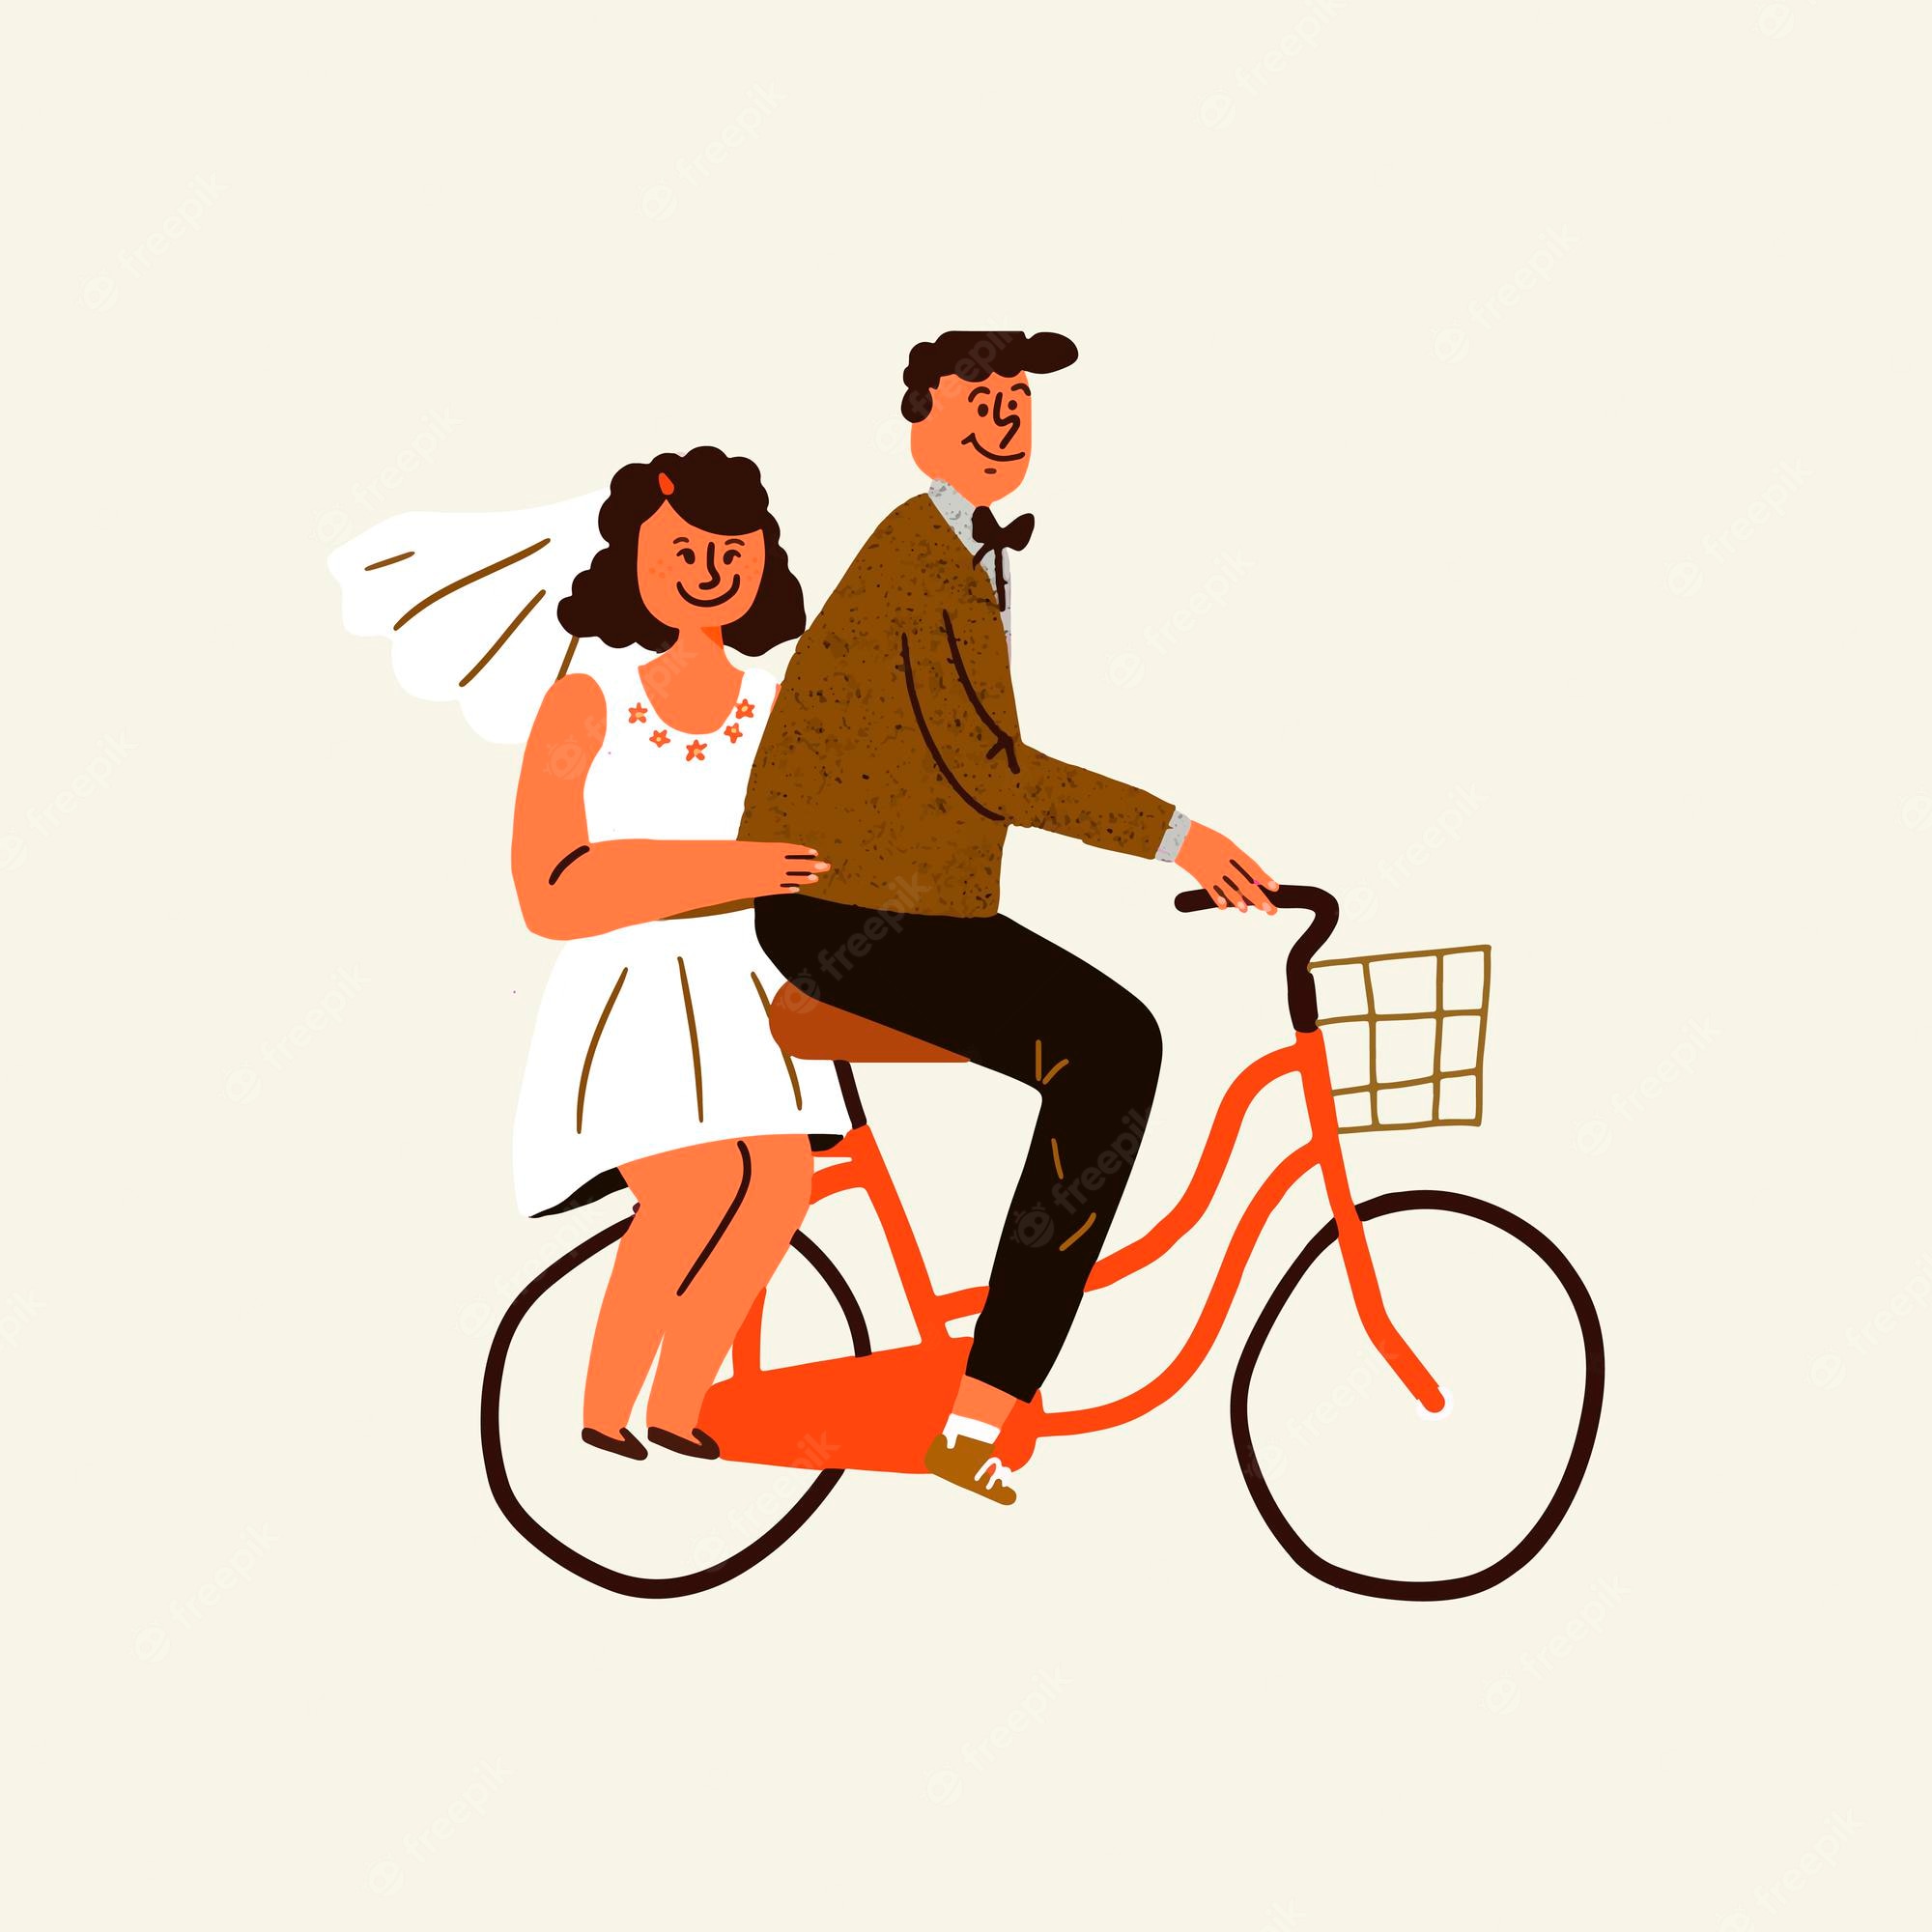 Bride And Groom Cartoon Images | Free Vectors, Stock Photos & PSD